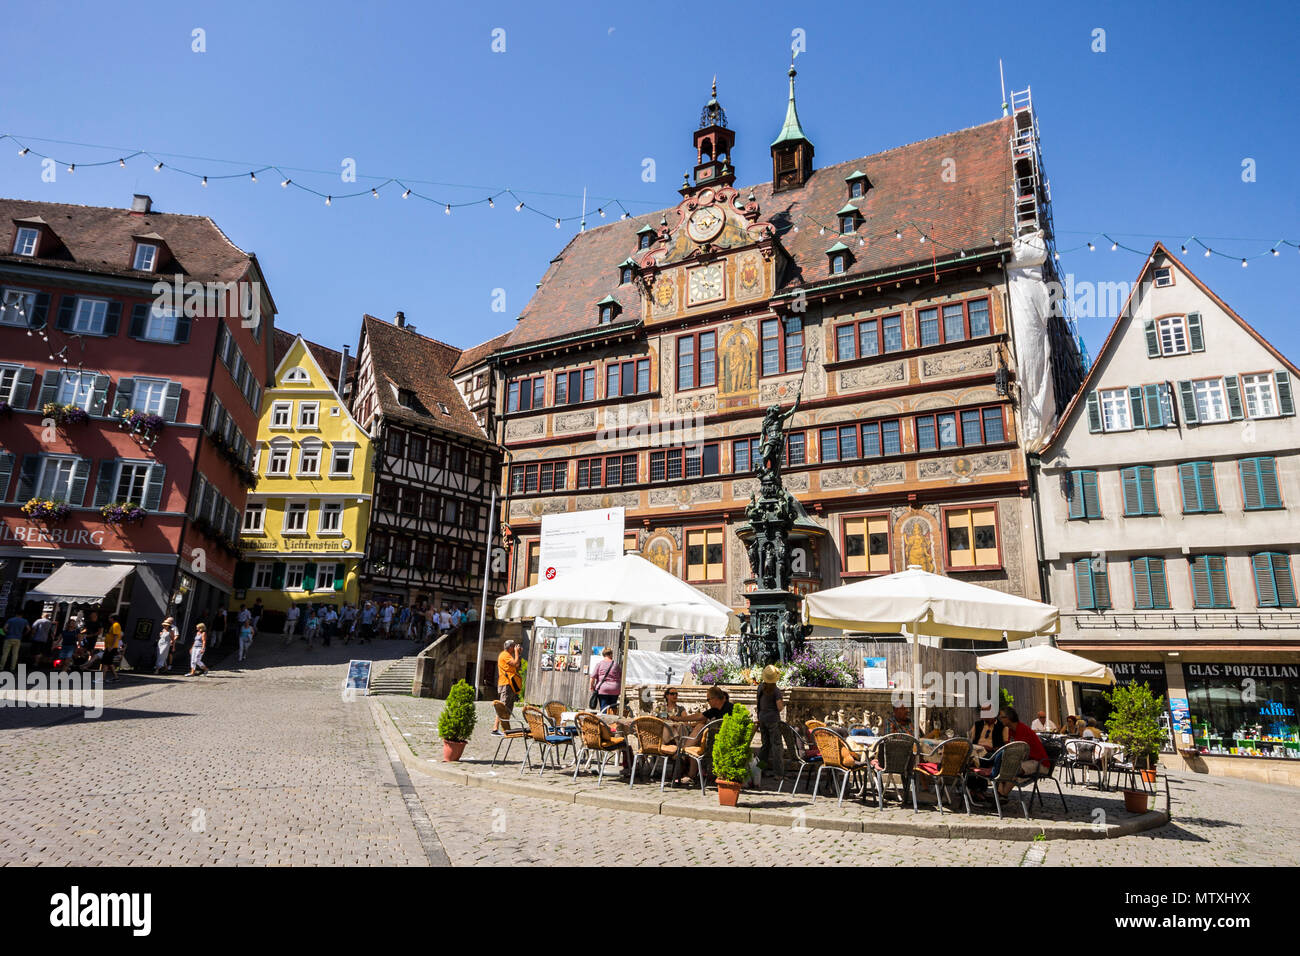 Tubingen, Germany. The Rathaus (Town Hall) in the Marktplatz (Market Square) of Tubingen, a traditional university town in central Baden-Wurttemberg,  Stock Photo